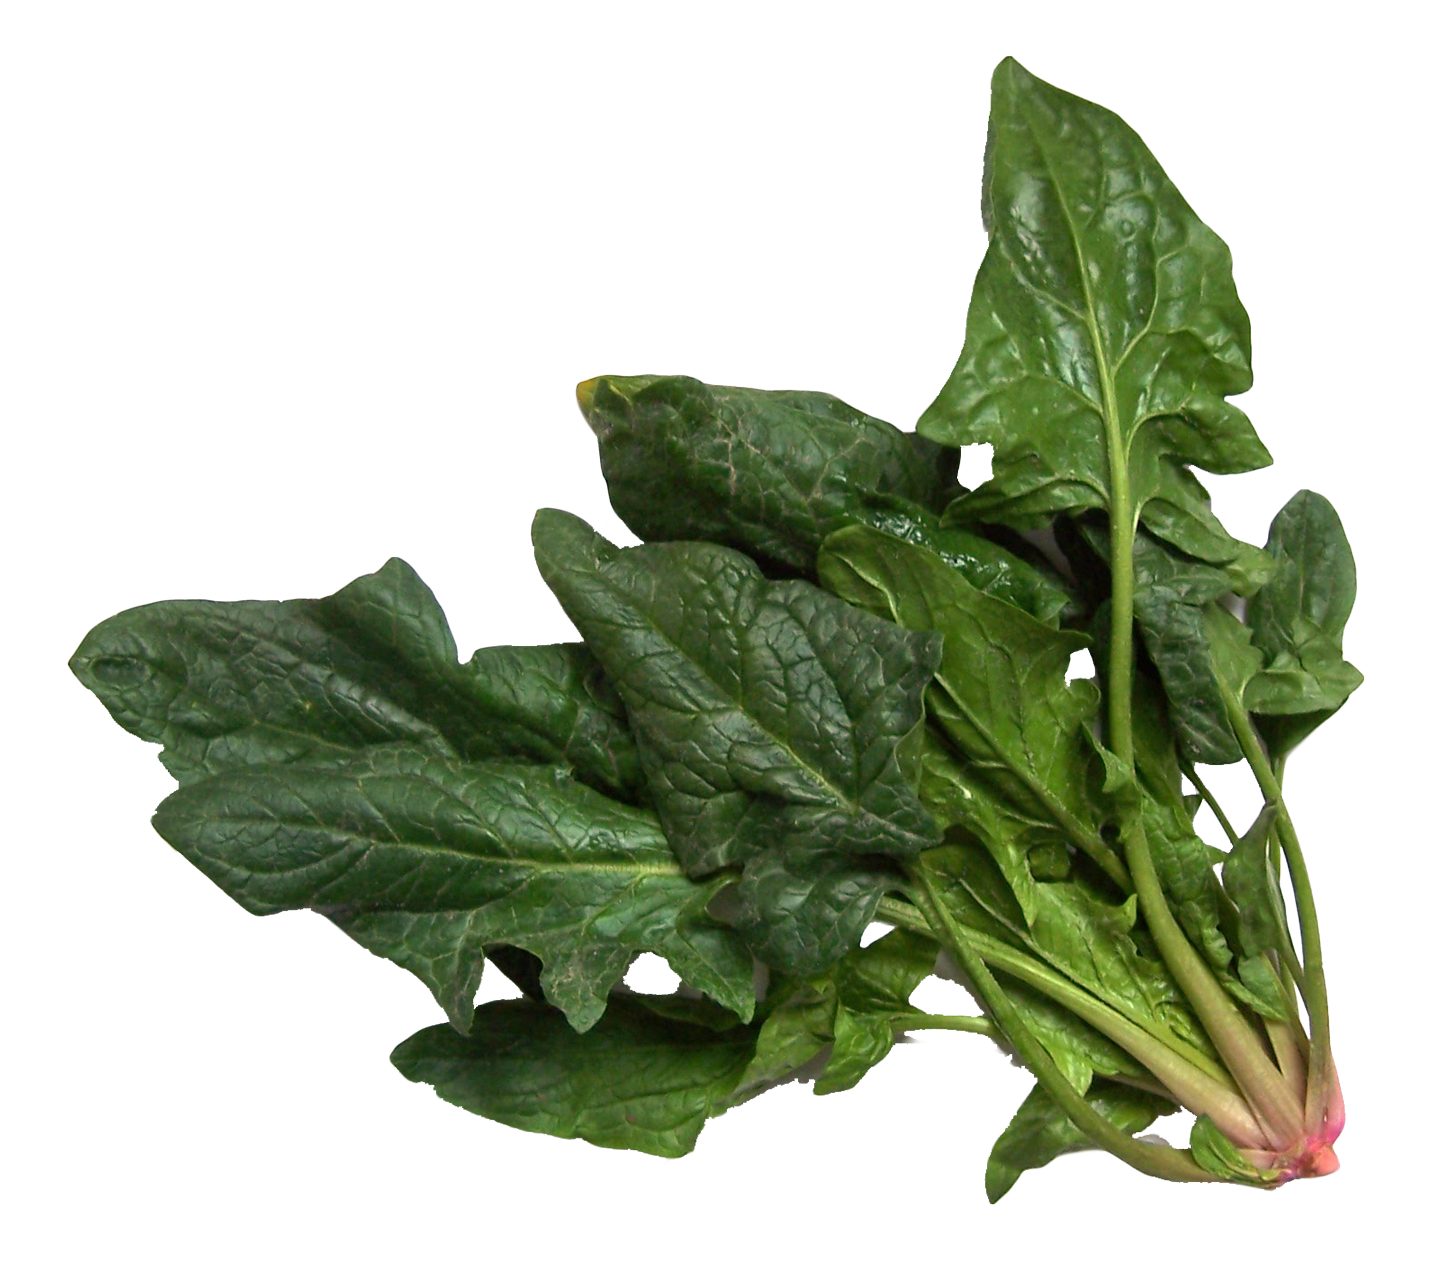 Spinach PNG Image